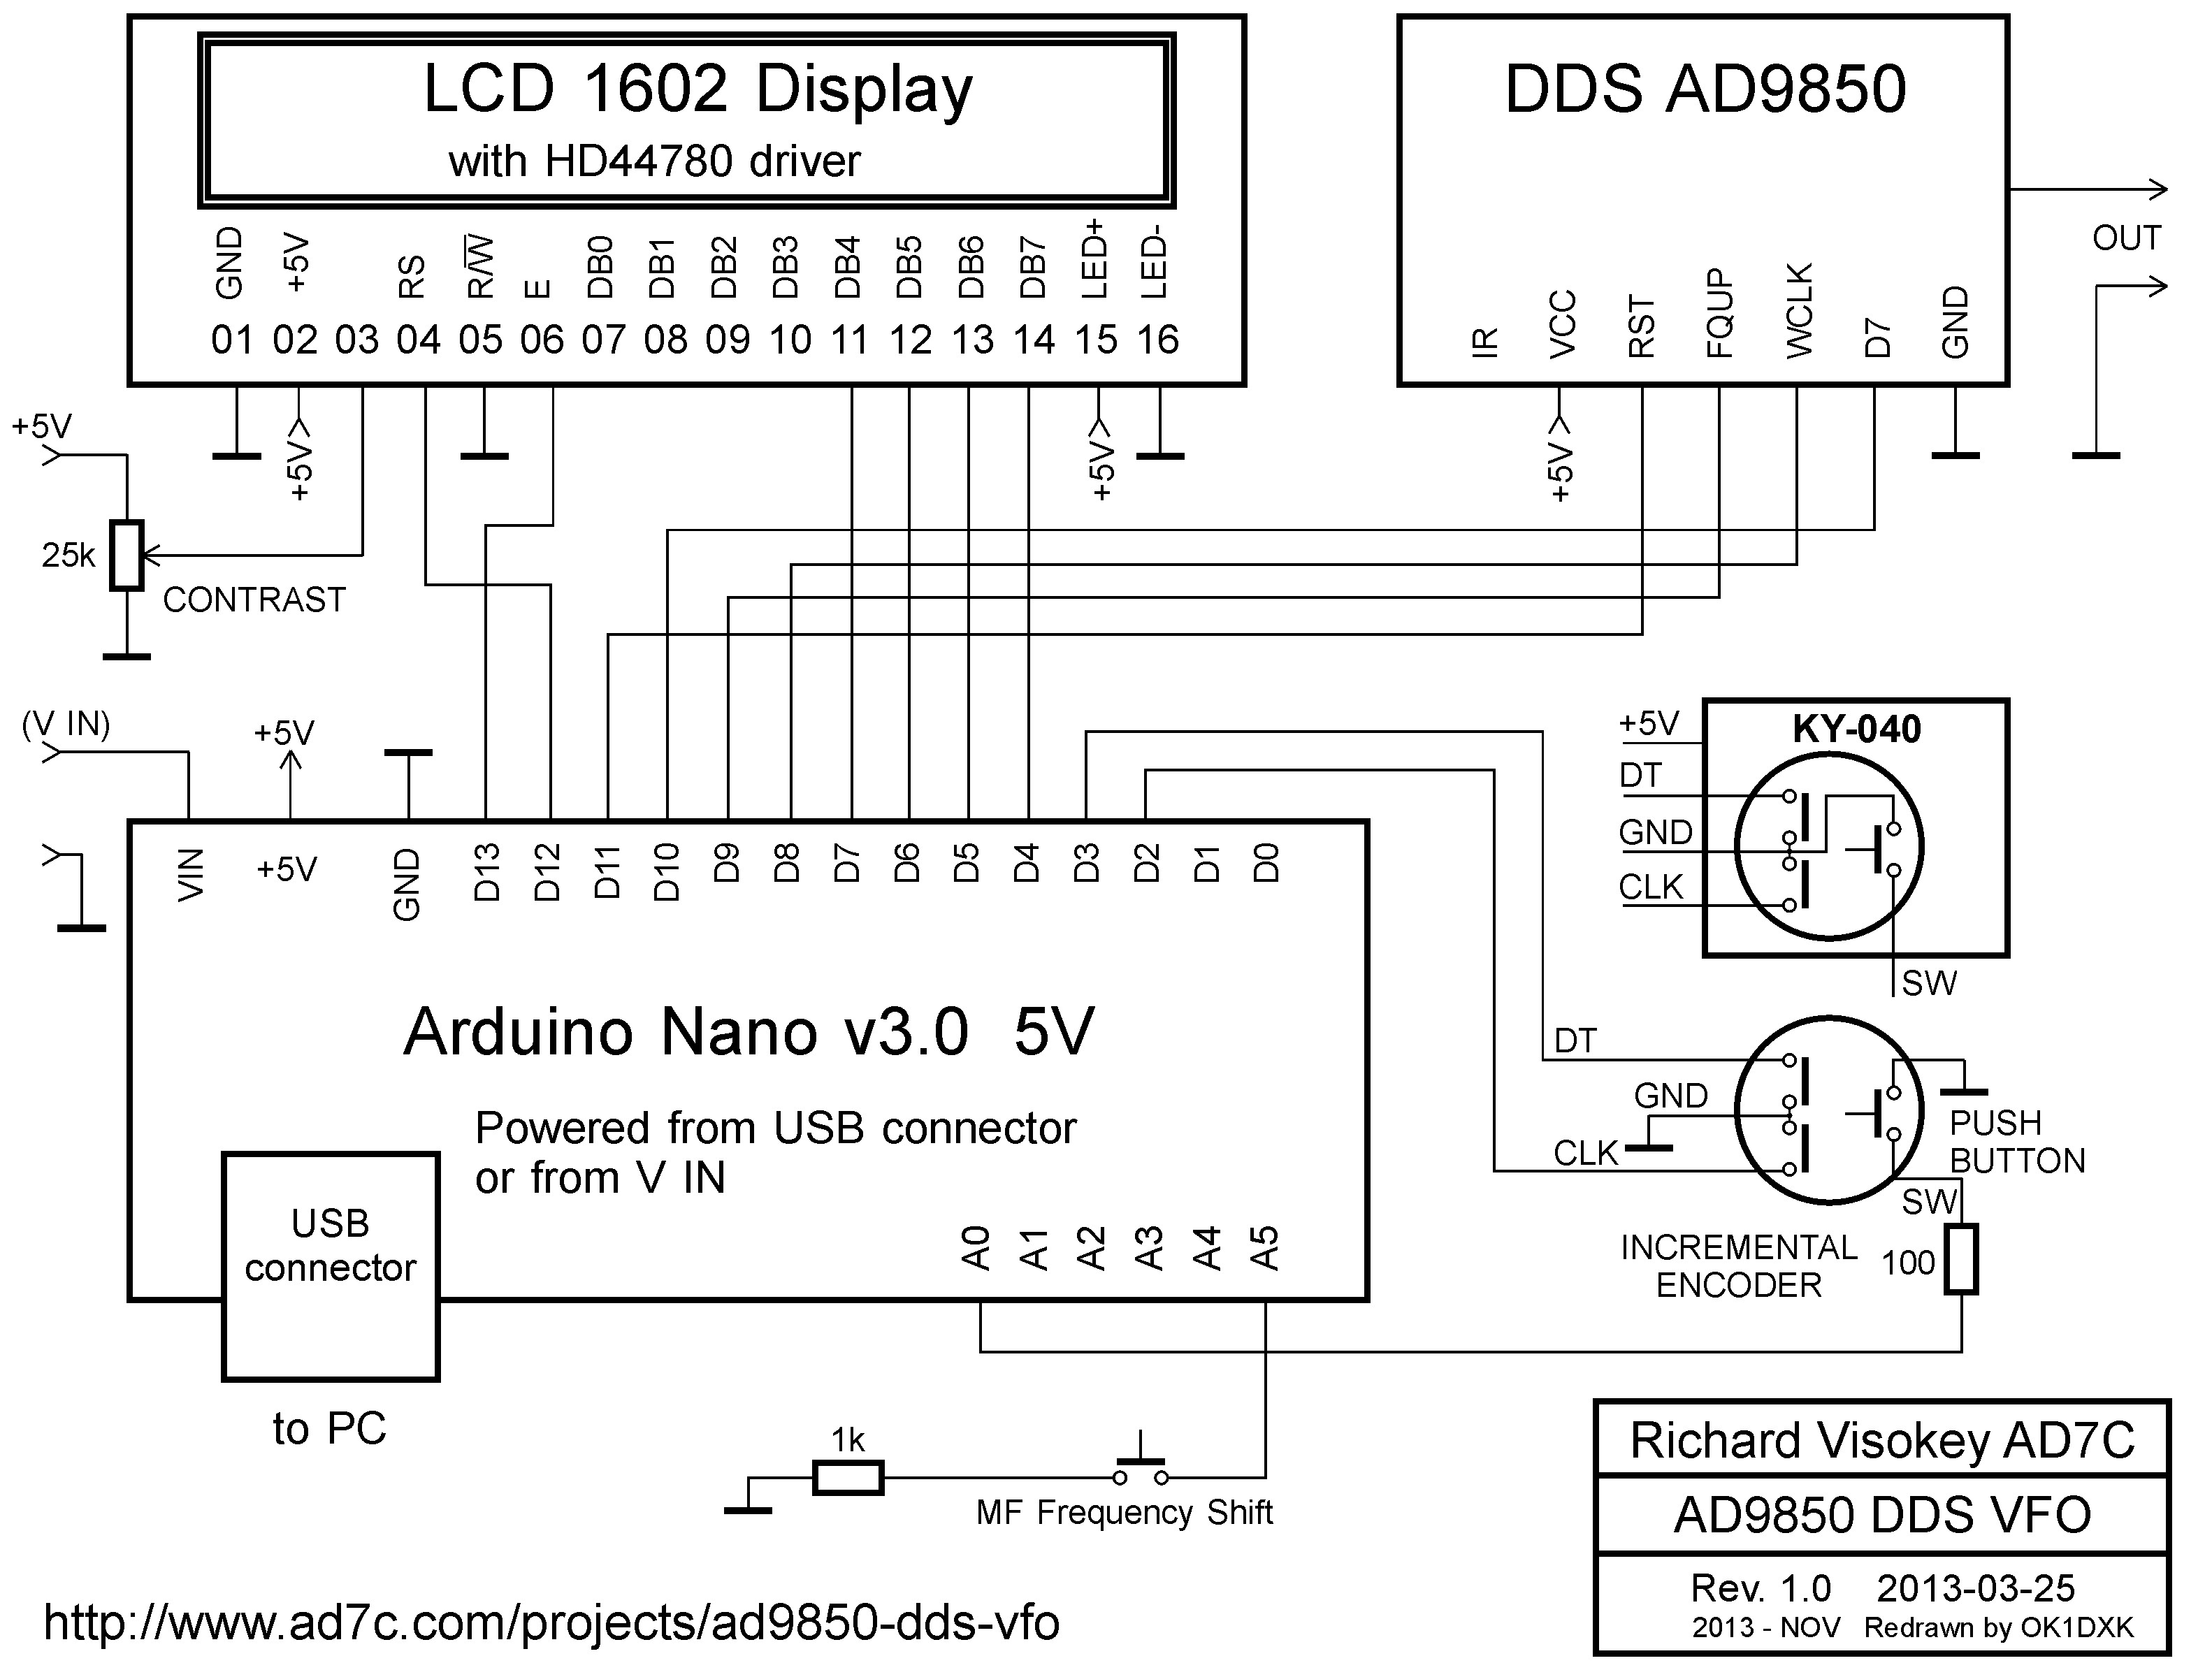 ad980 dds vfo schematic H5pNI85vTM